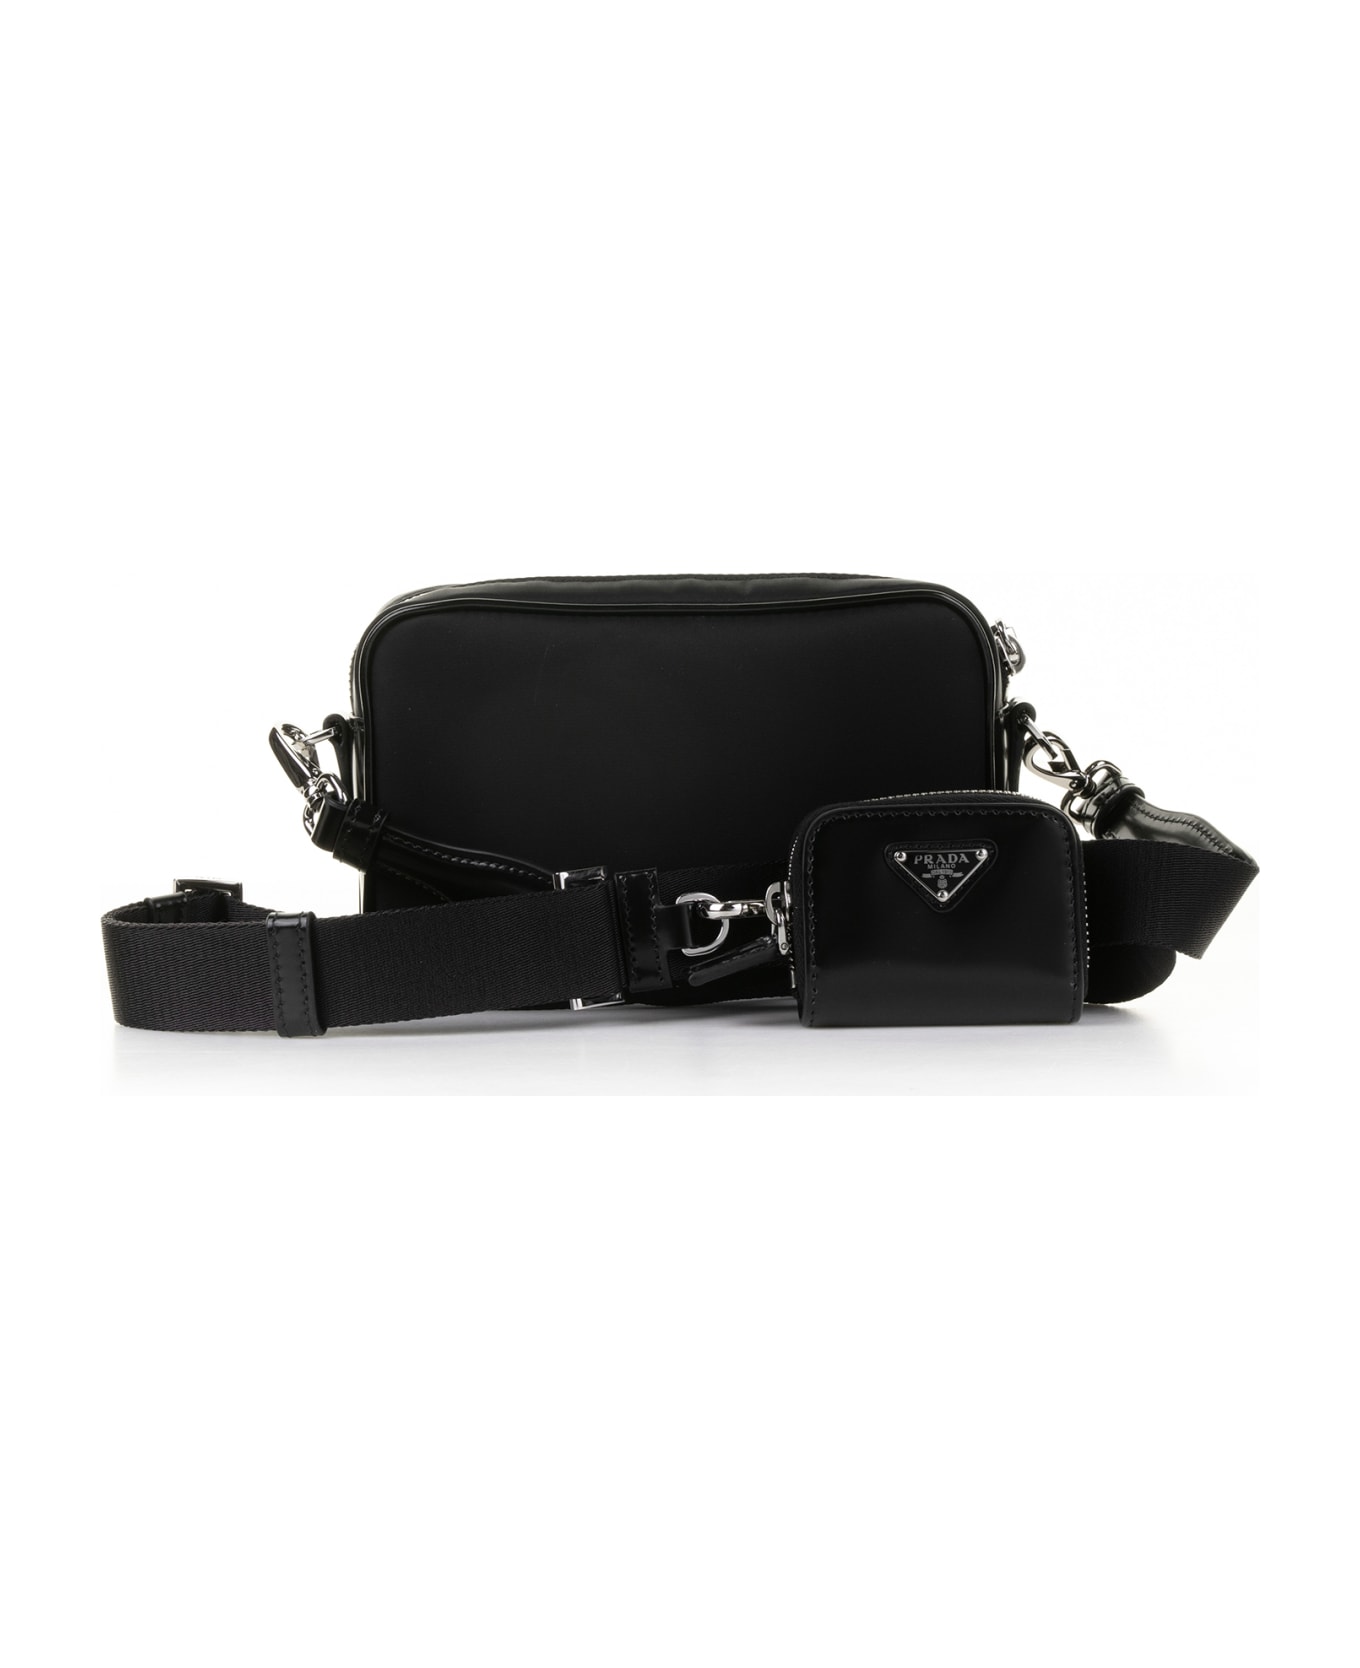 Prada Shoulder Bag In Re-nylon And Brushed Leather - NERO